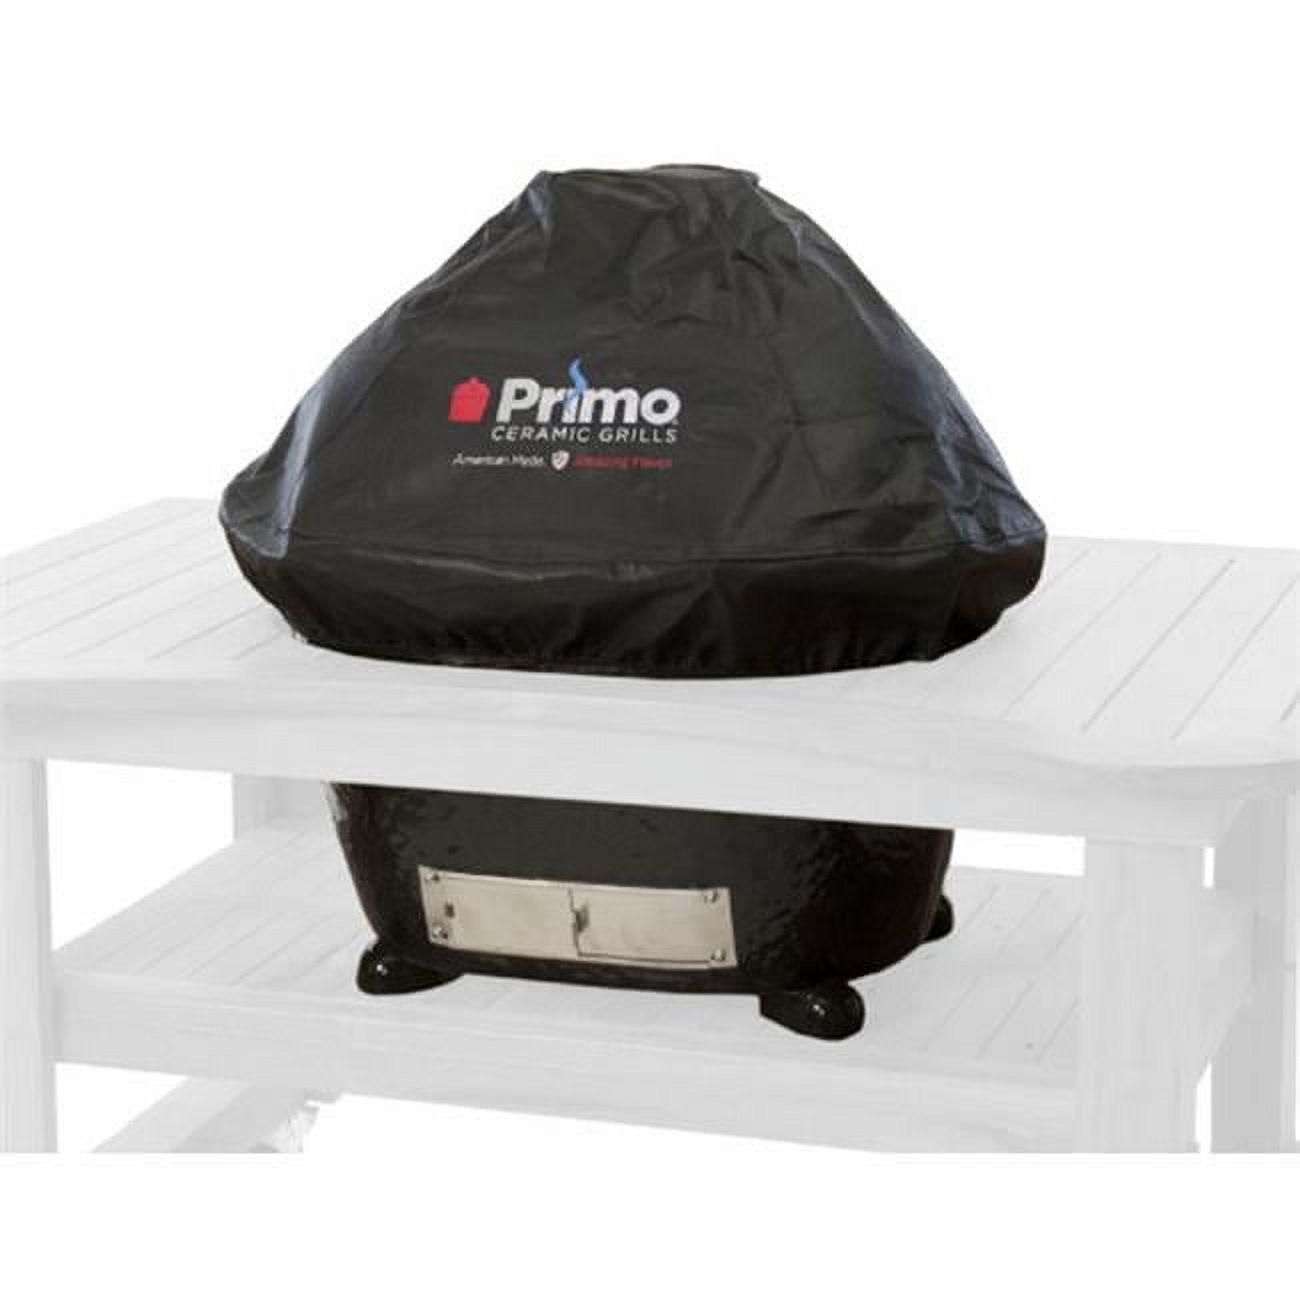 Primo Grills PMGPG00416 Grill Cover for All Oval Grills in Builtin Applications - image 1 of 3